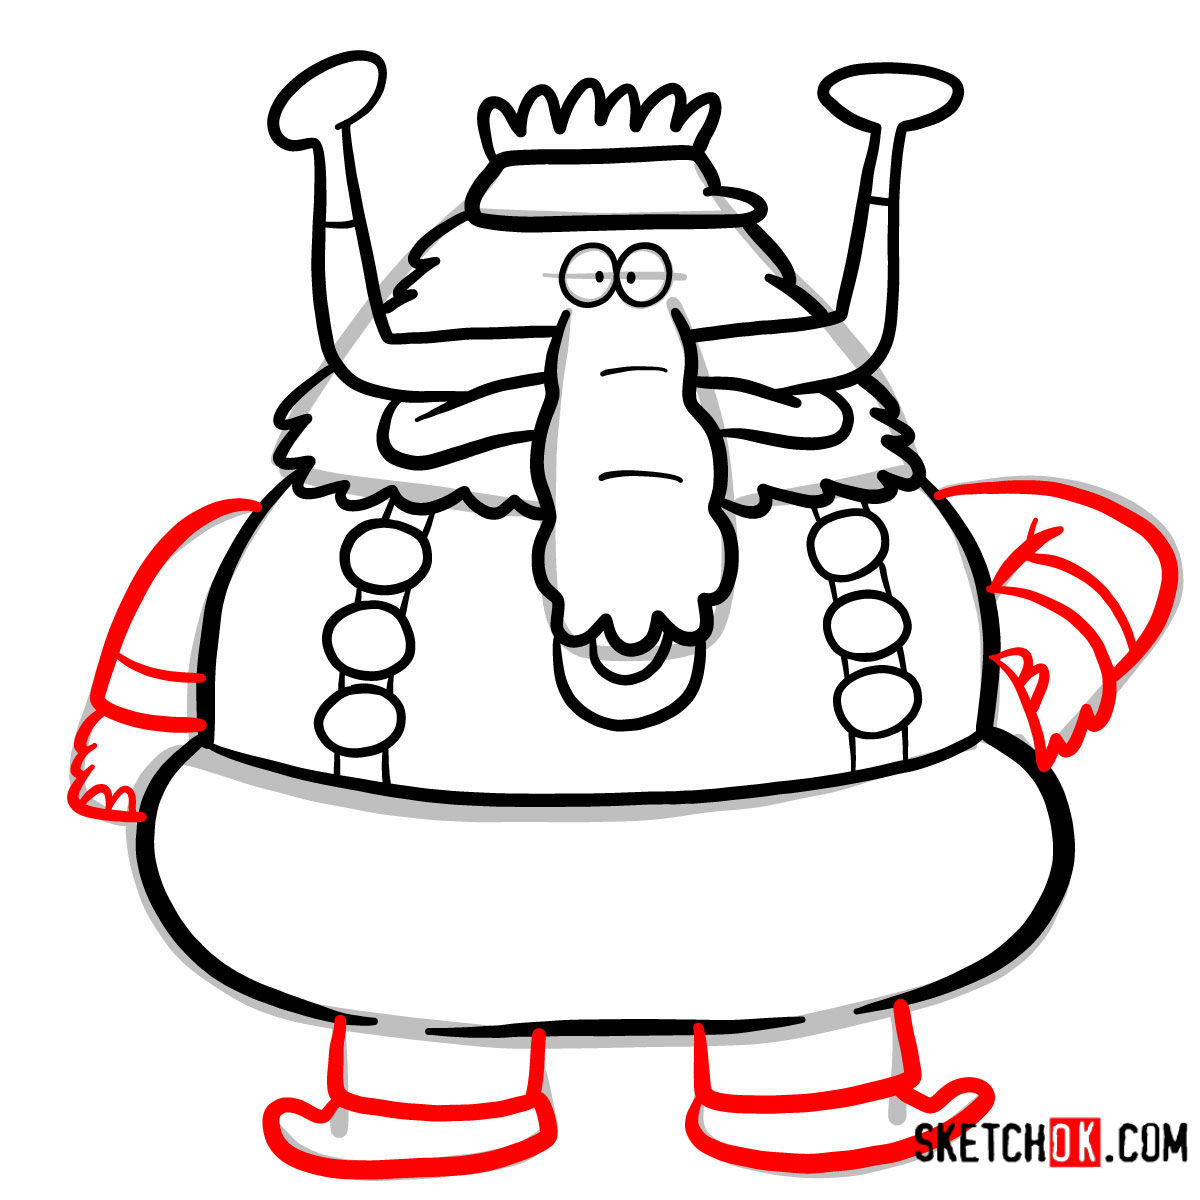 How to draw Gazpacho from Chowder series - step 07